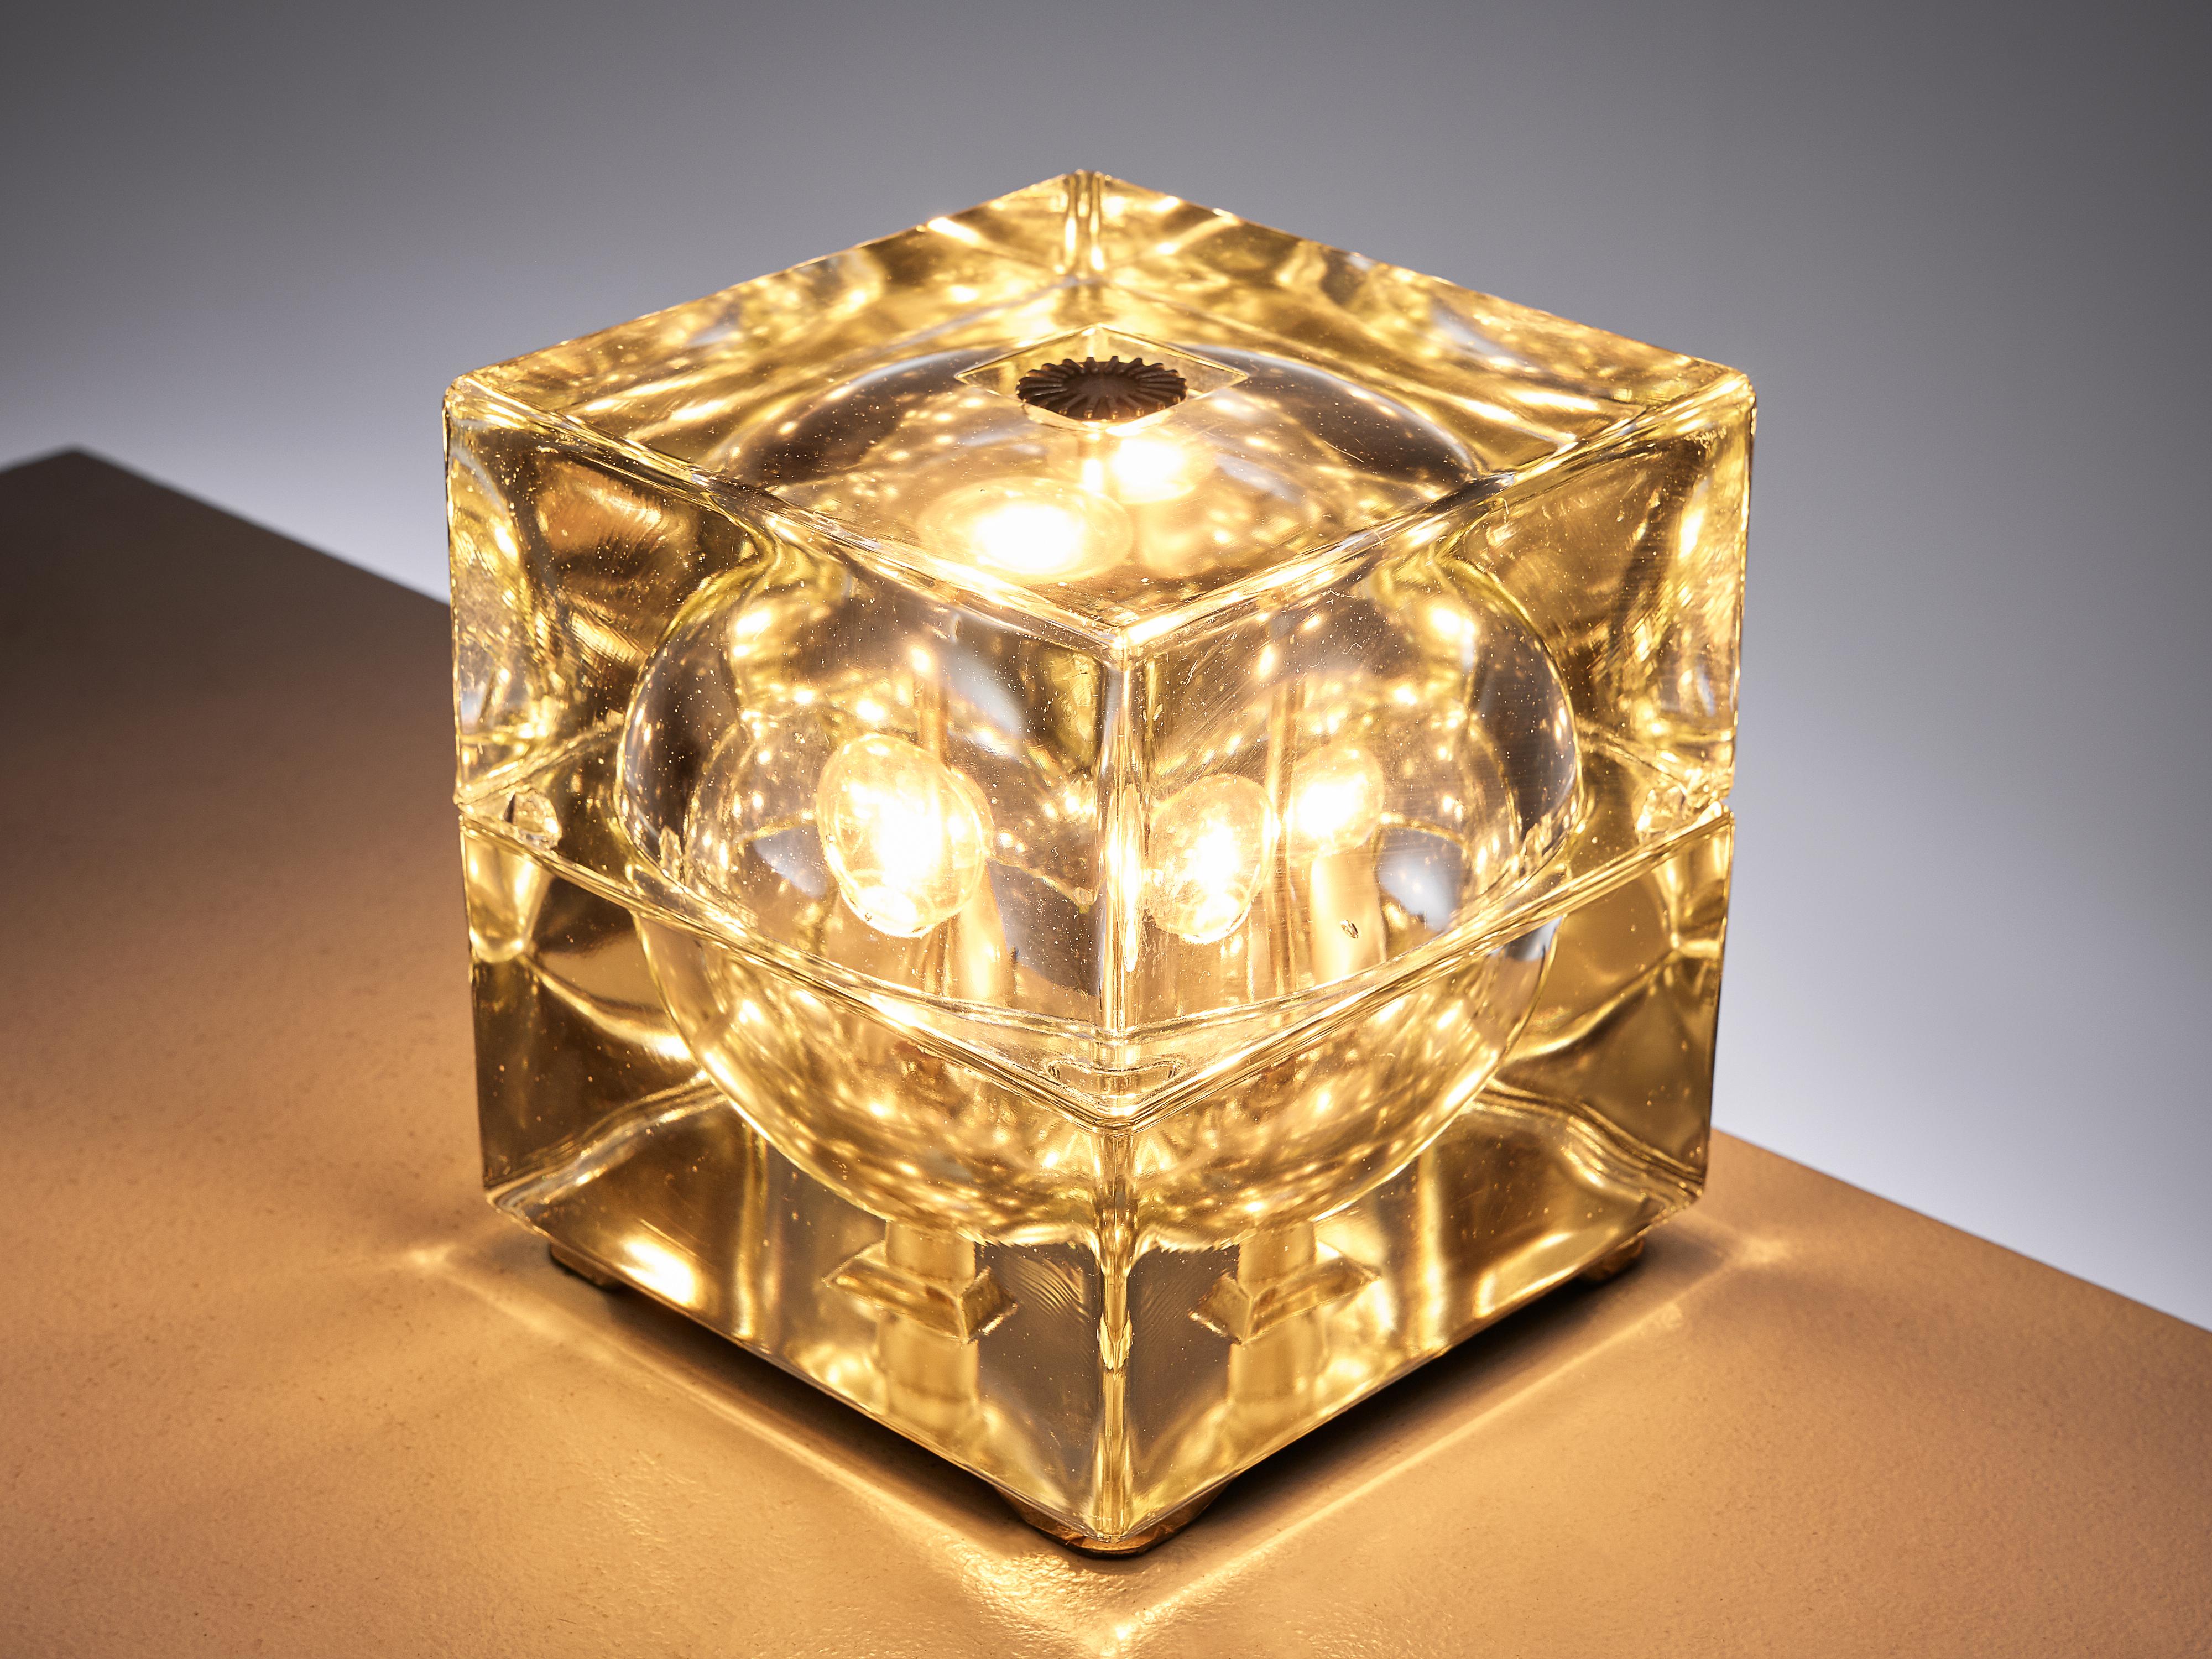 Alessandro Mendini for Fidenza Vitraria, 'Cubosfera' table lamp, glass and metal, Italy, 1968

Iconic 'Cubosfera' table lamp designed by Alessandro Mendini for Fidenza Vitraria. The cubic shaped solid glass cube creates a frosted glass sphere on the